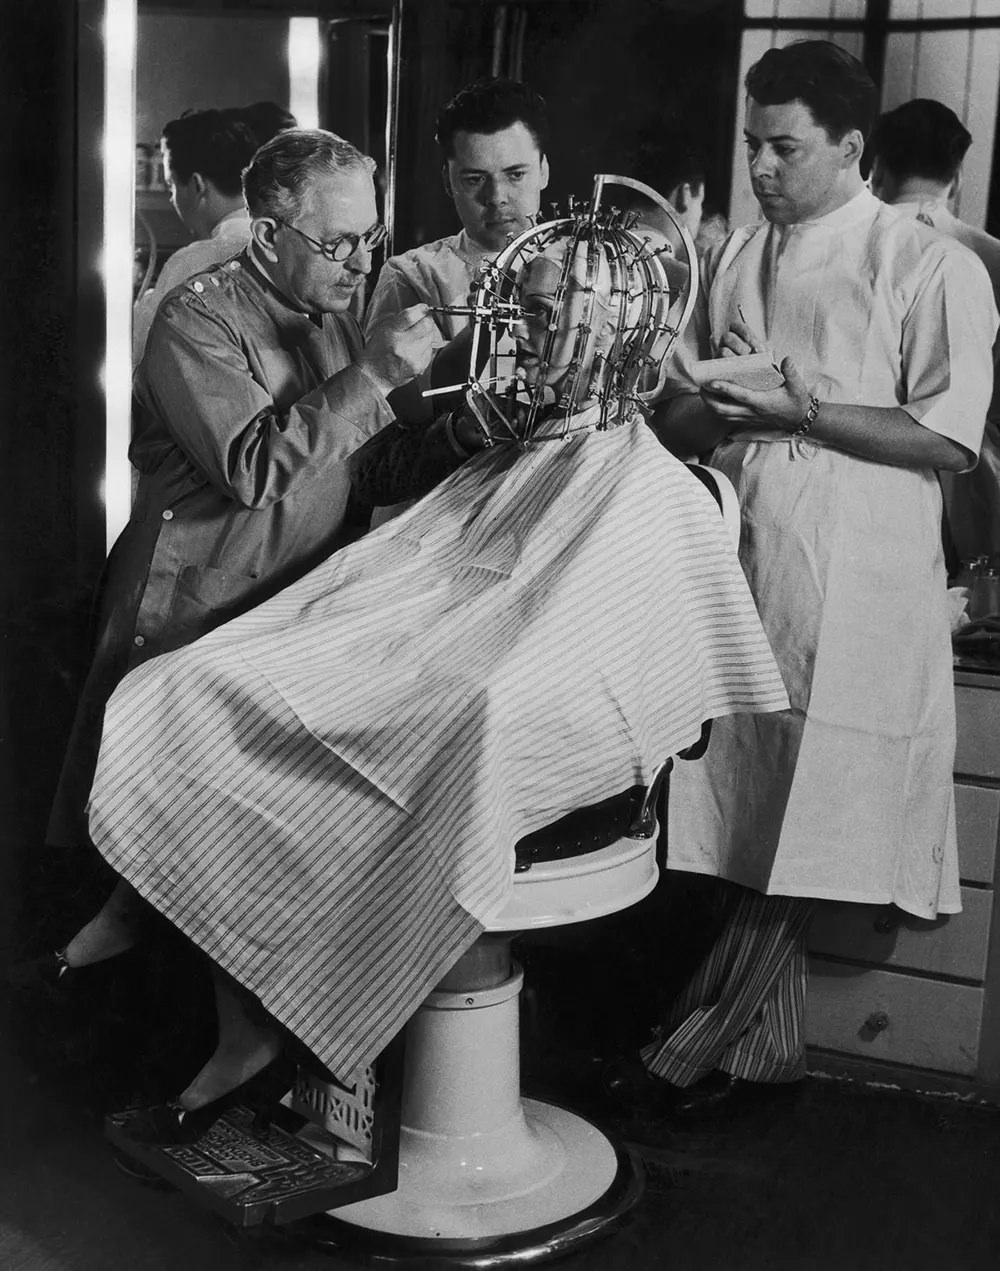 Beauty Calibrator: A Bizarre Beauty-Measuring device to Analyse and correct Facial Flaws from the 1930s